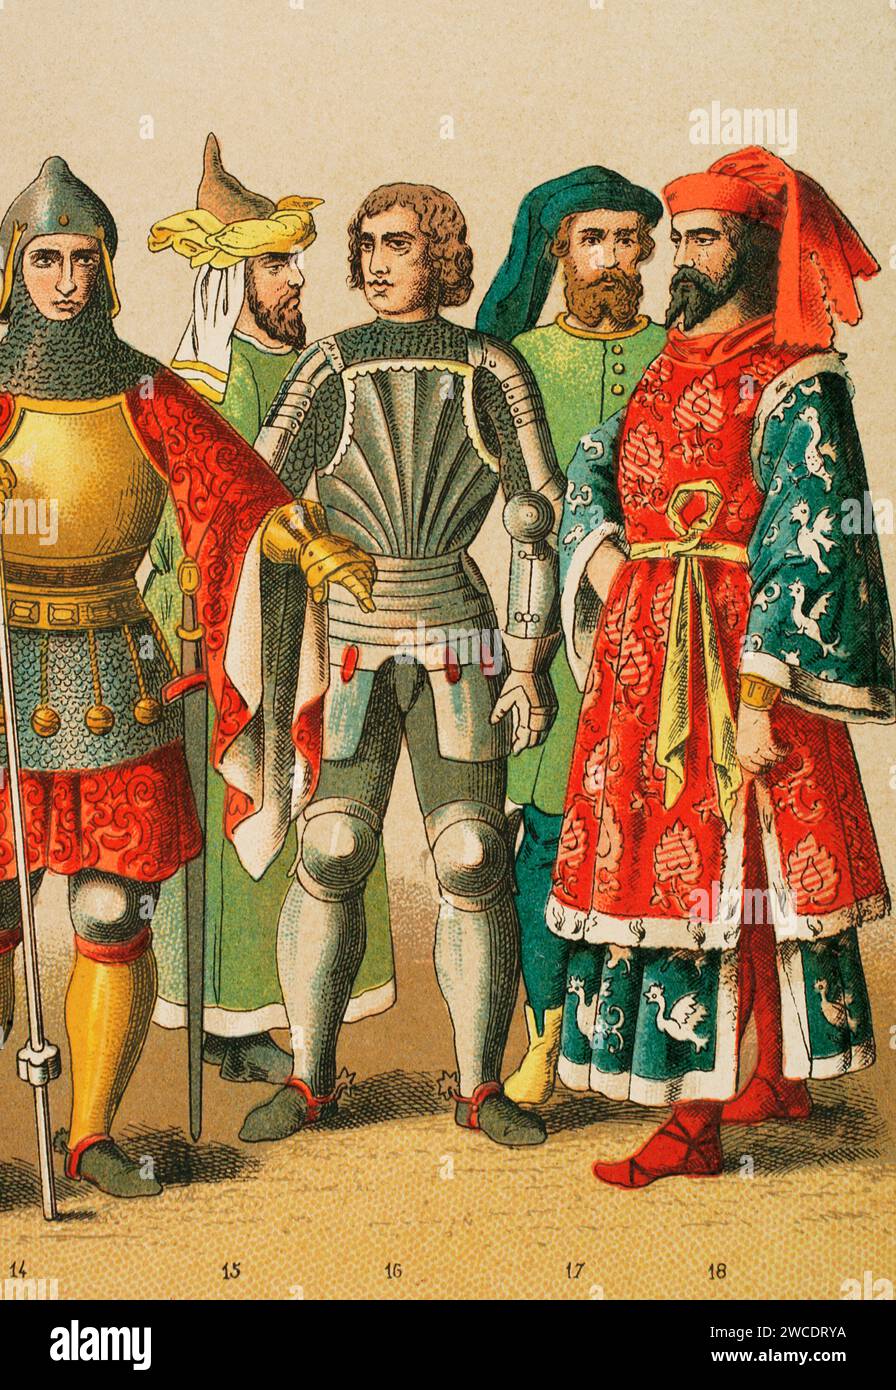 History of Germany. Middle Ages. 1400-1450. From left to right, 14: knight, 15: nobleman, 16: knight, 17-18: noblemen. Chromolithography. 'Historia Universal', by César Cantú. Volume VII, 1881. Stock Photo